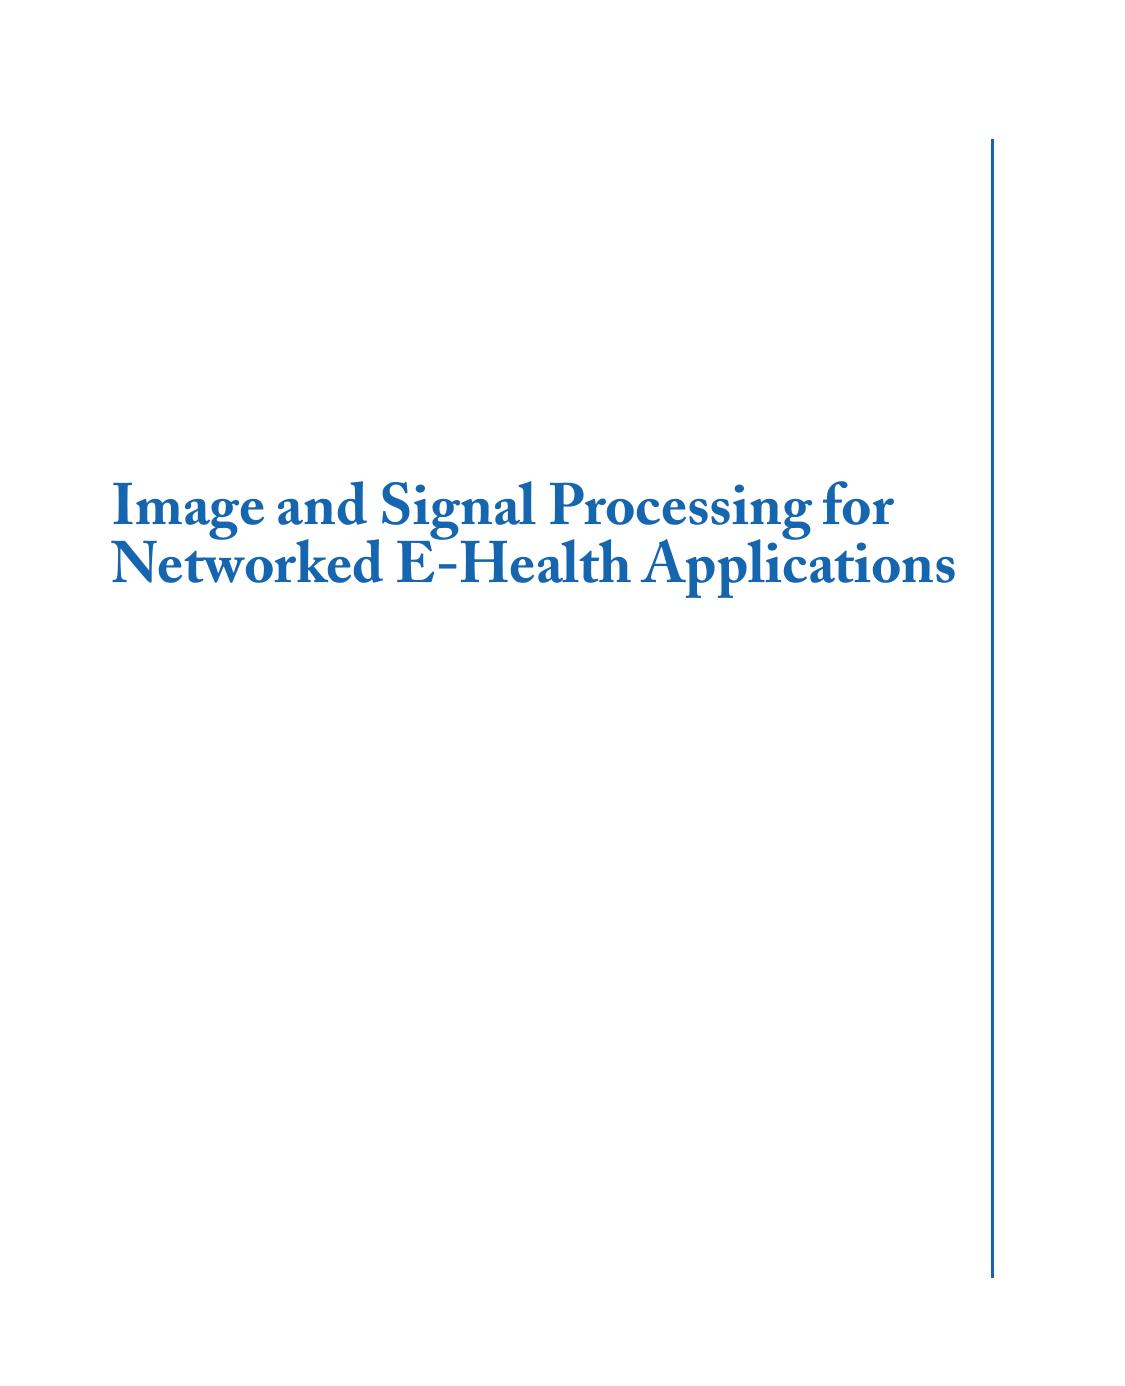 Image and Signal Processing for Networked E-Health Applications